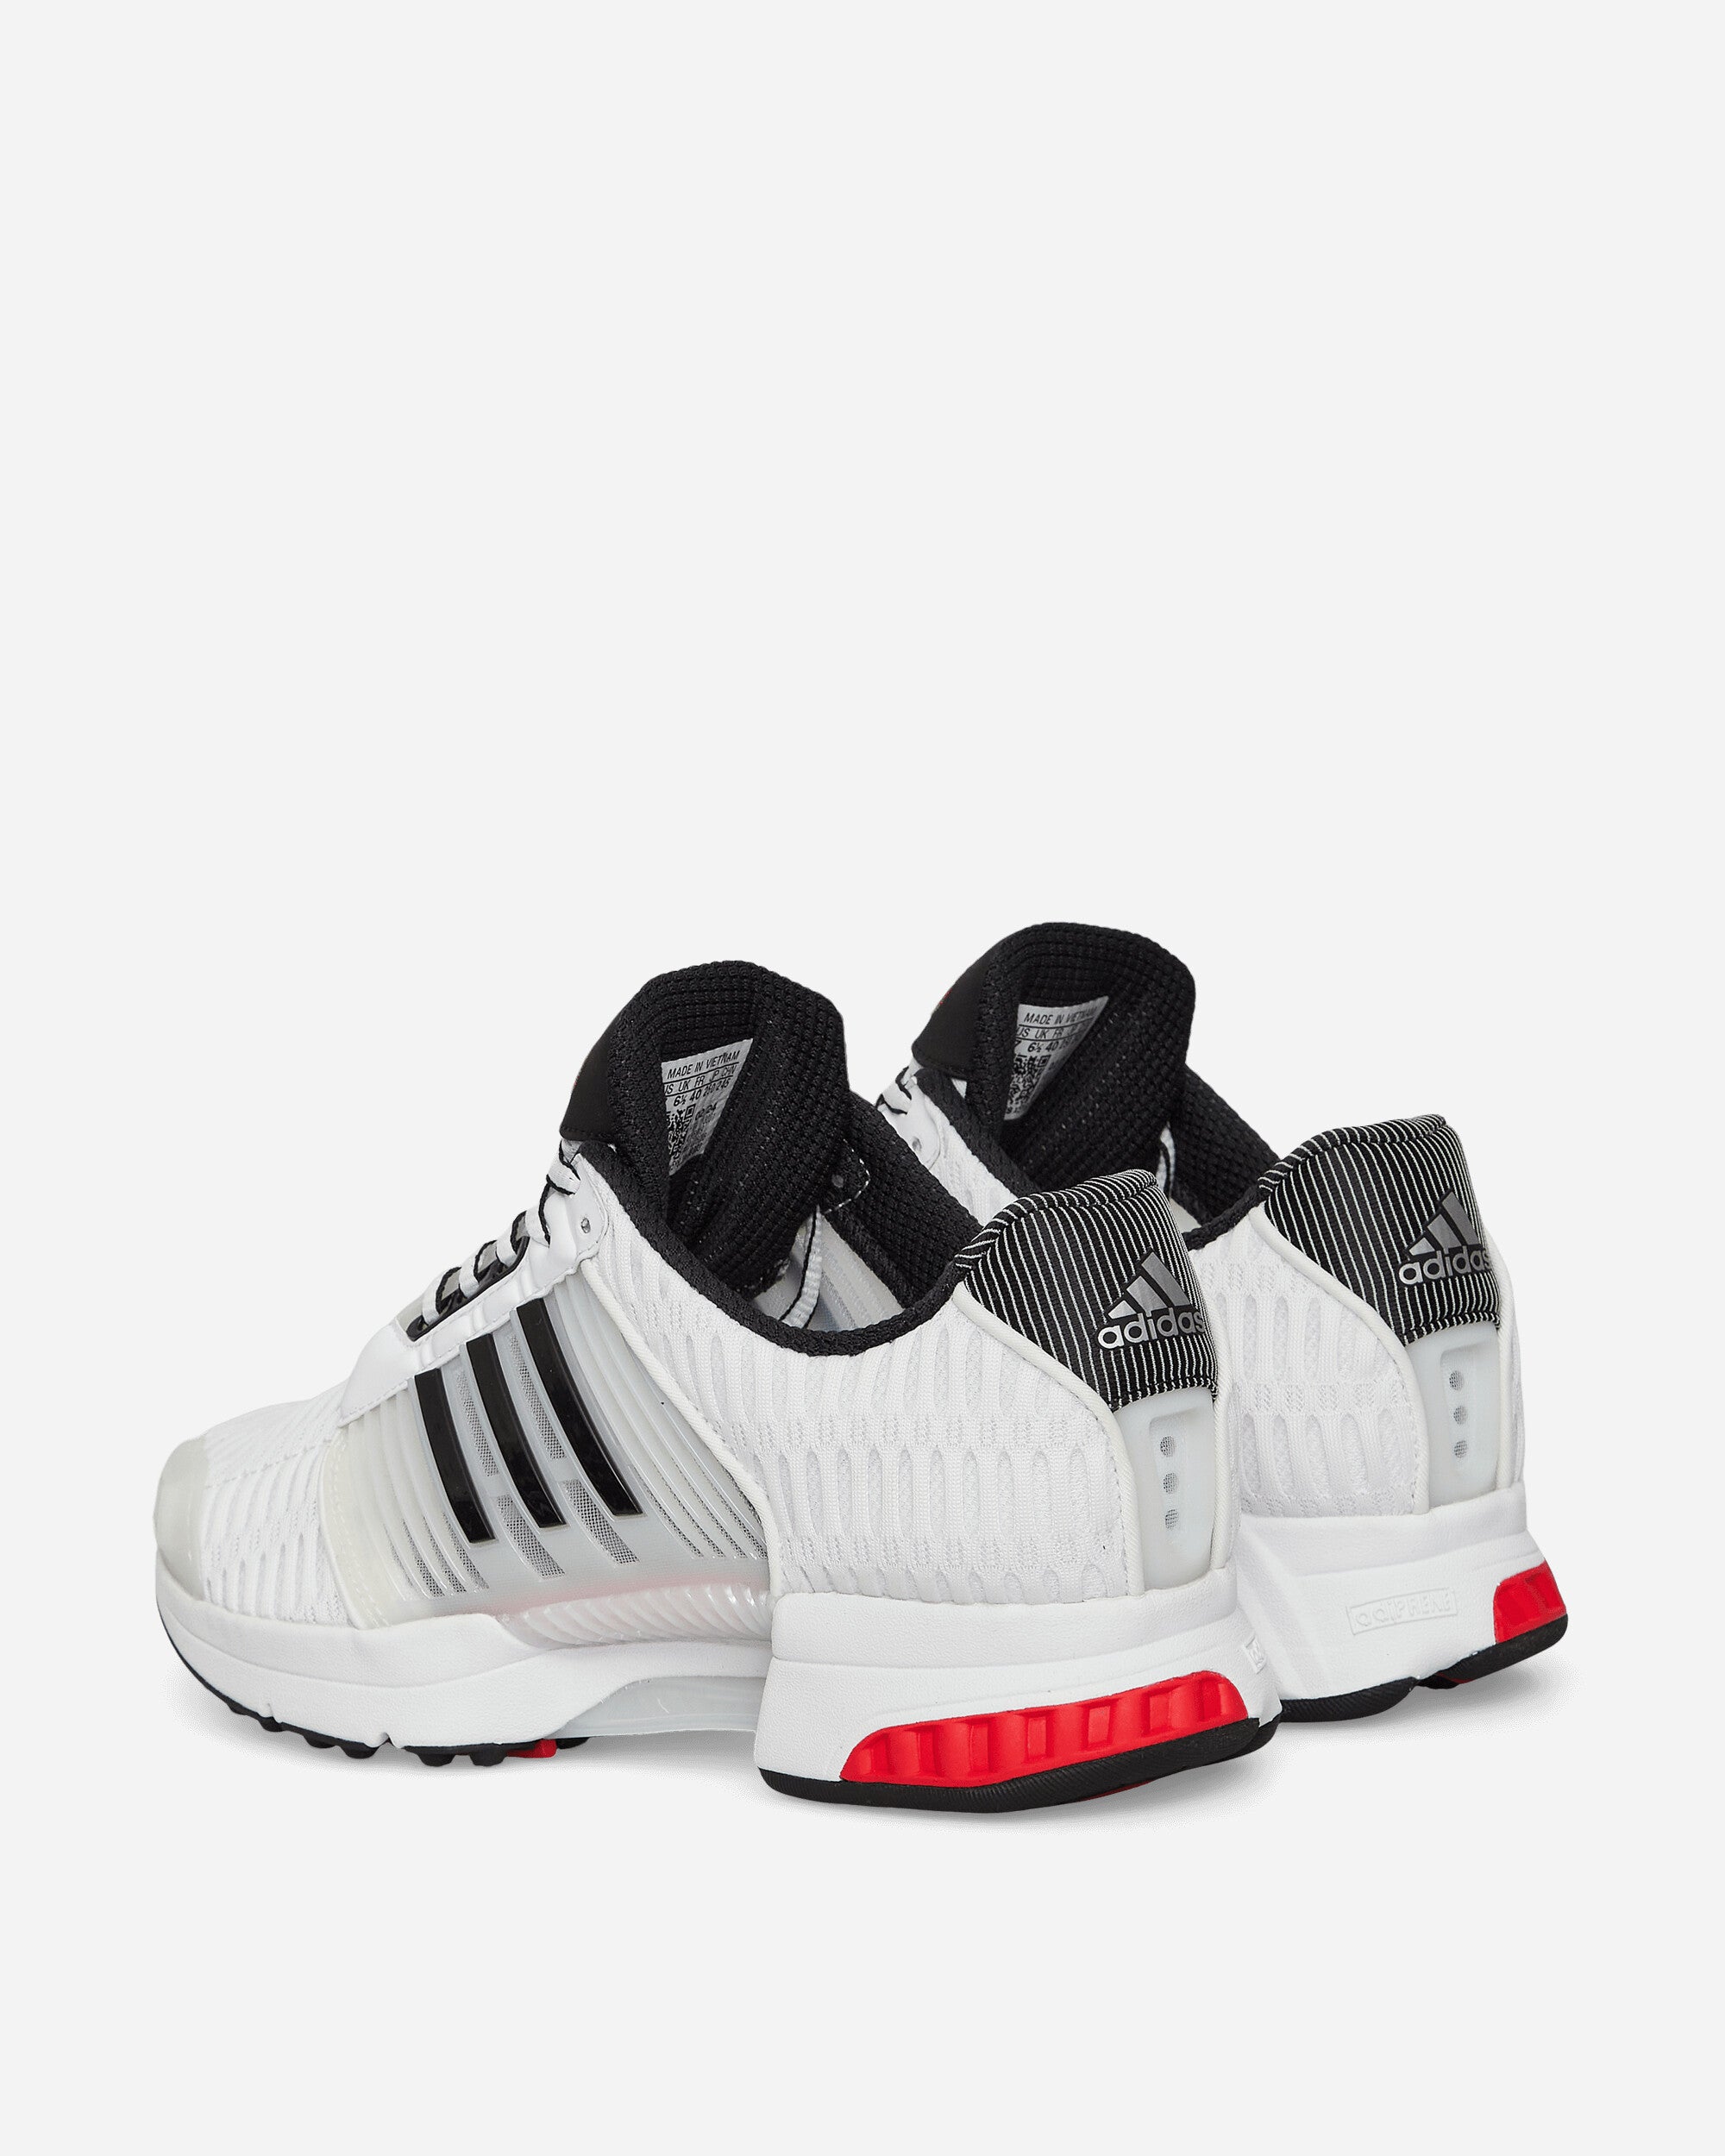 adidas Climacool 1 Core Black/Red Sneakers Low IF6849